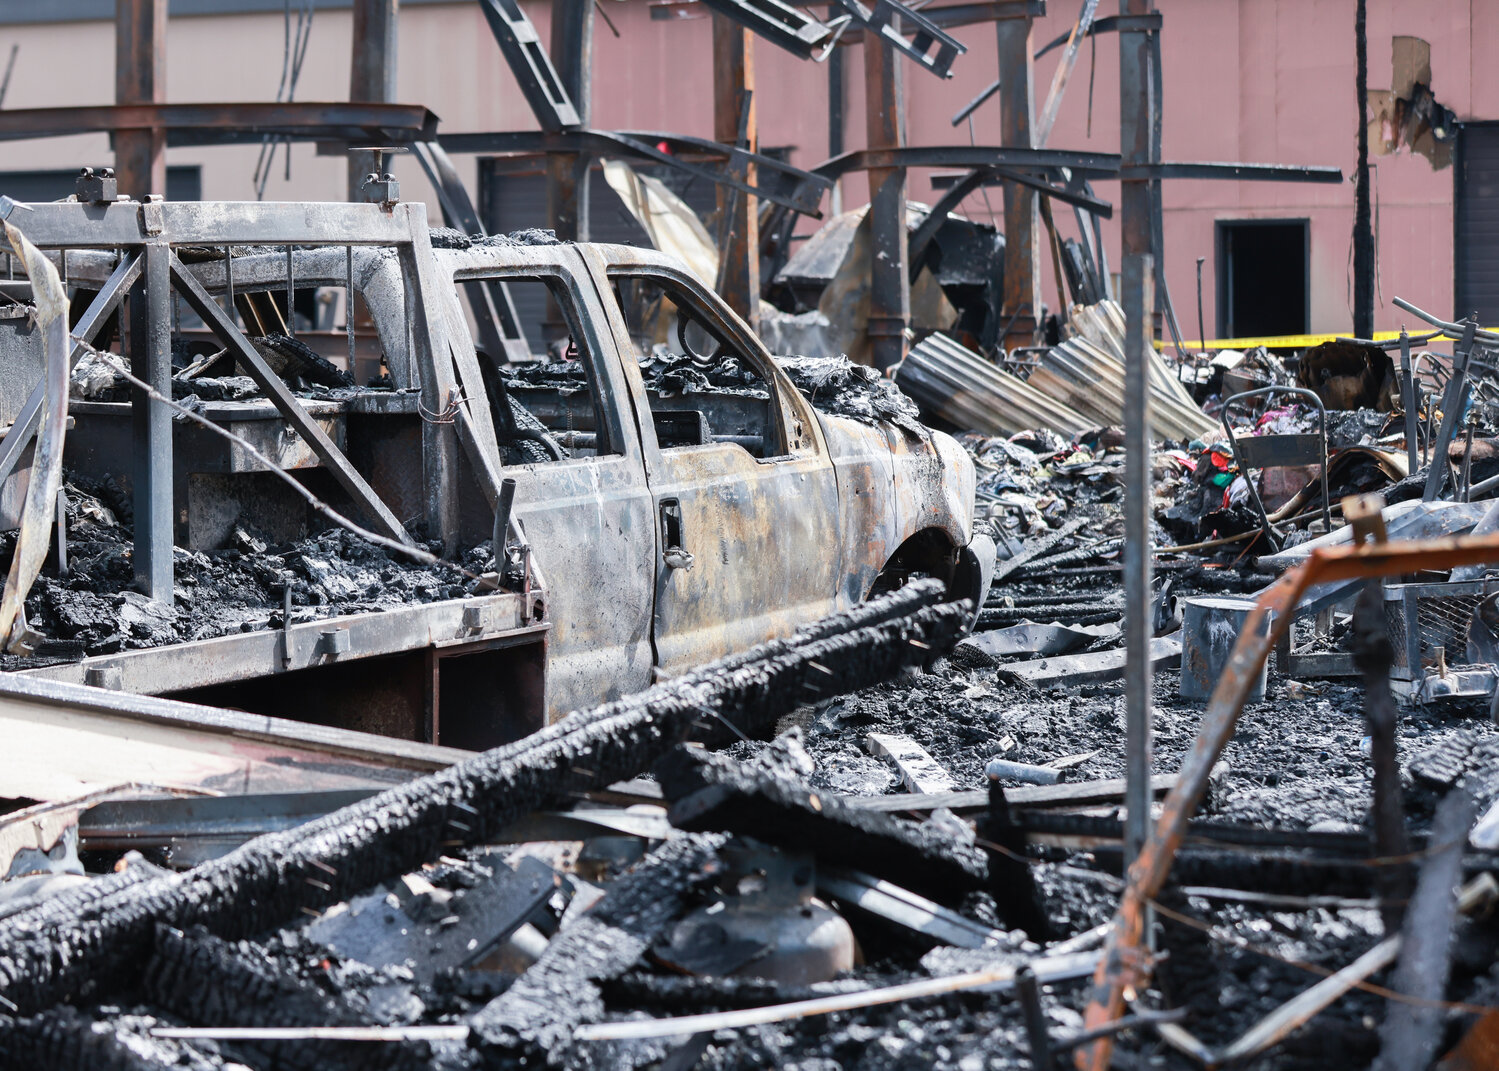 A work truck was destroyed during an industrial building fire in Salmon Creek that started late on Tuesday, June 6.